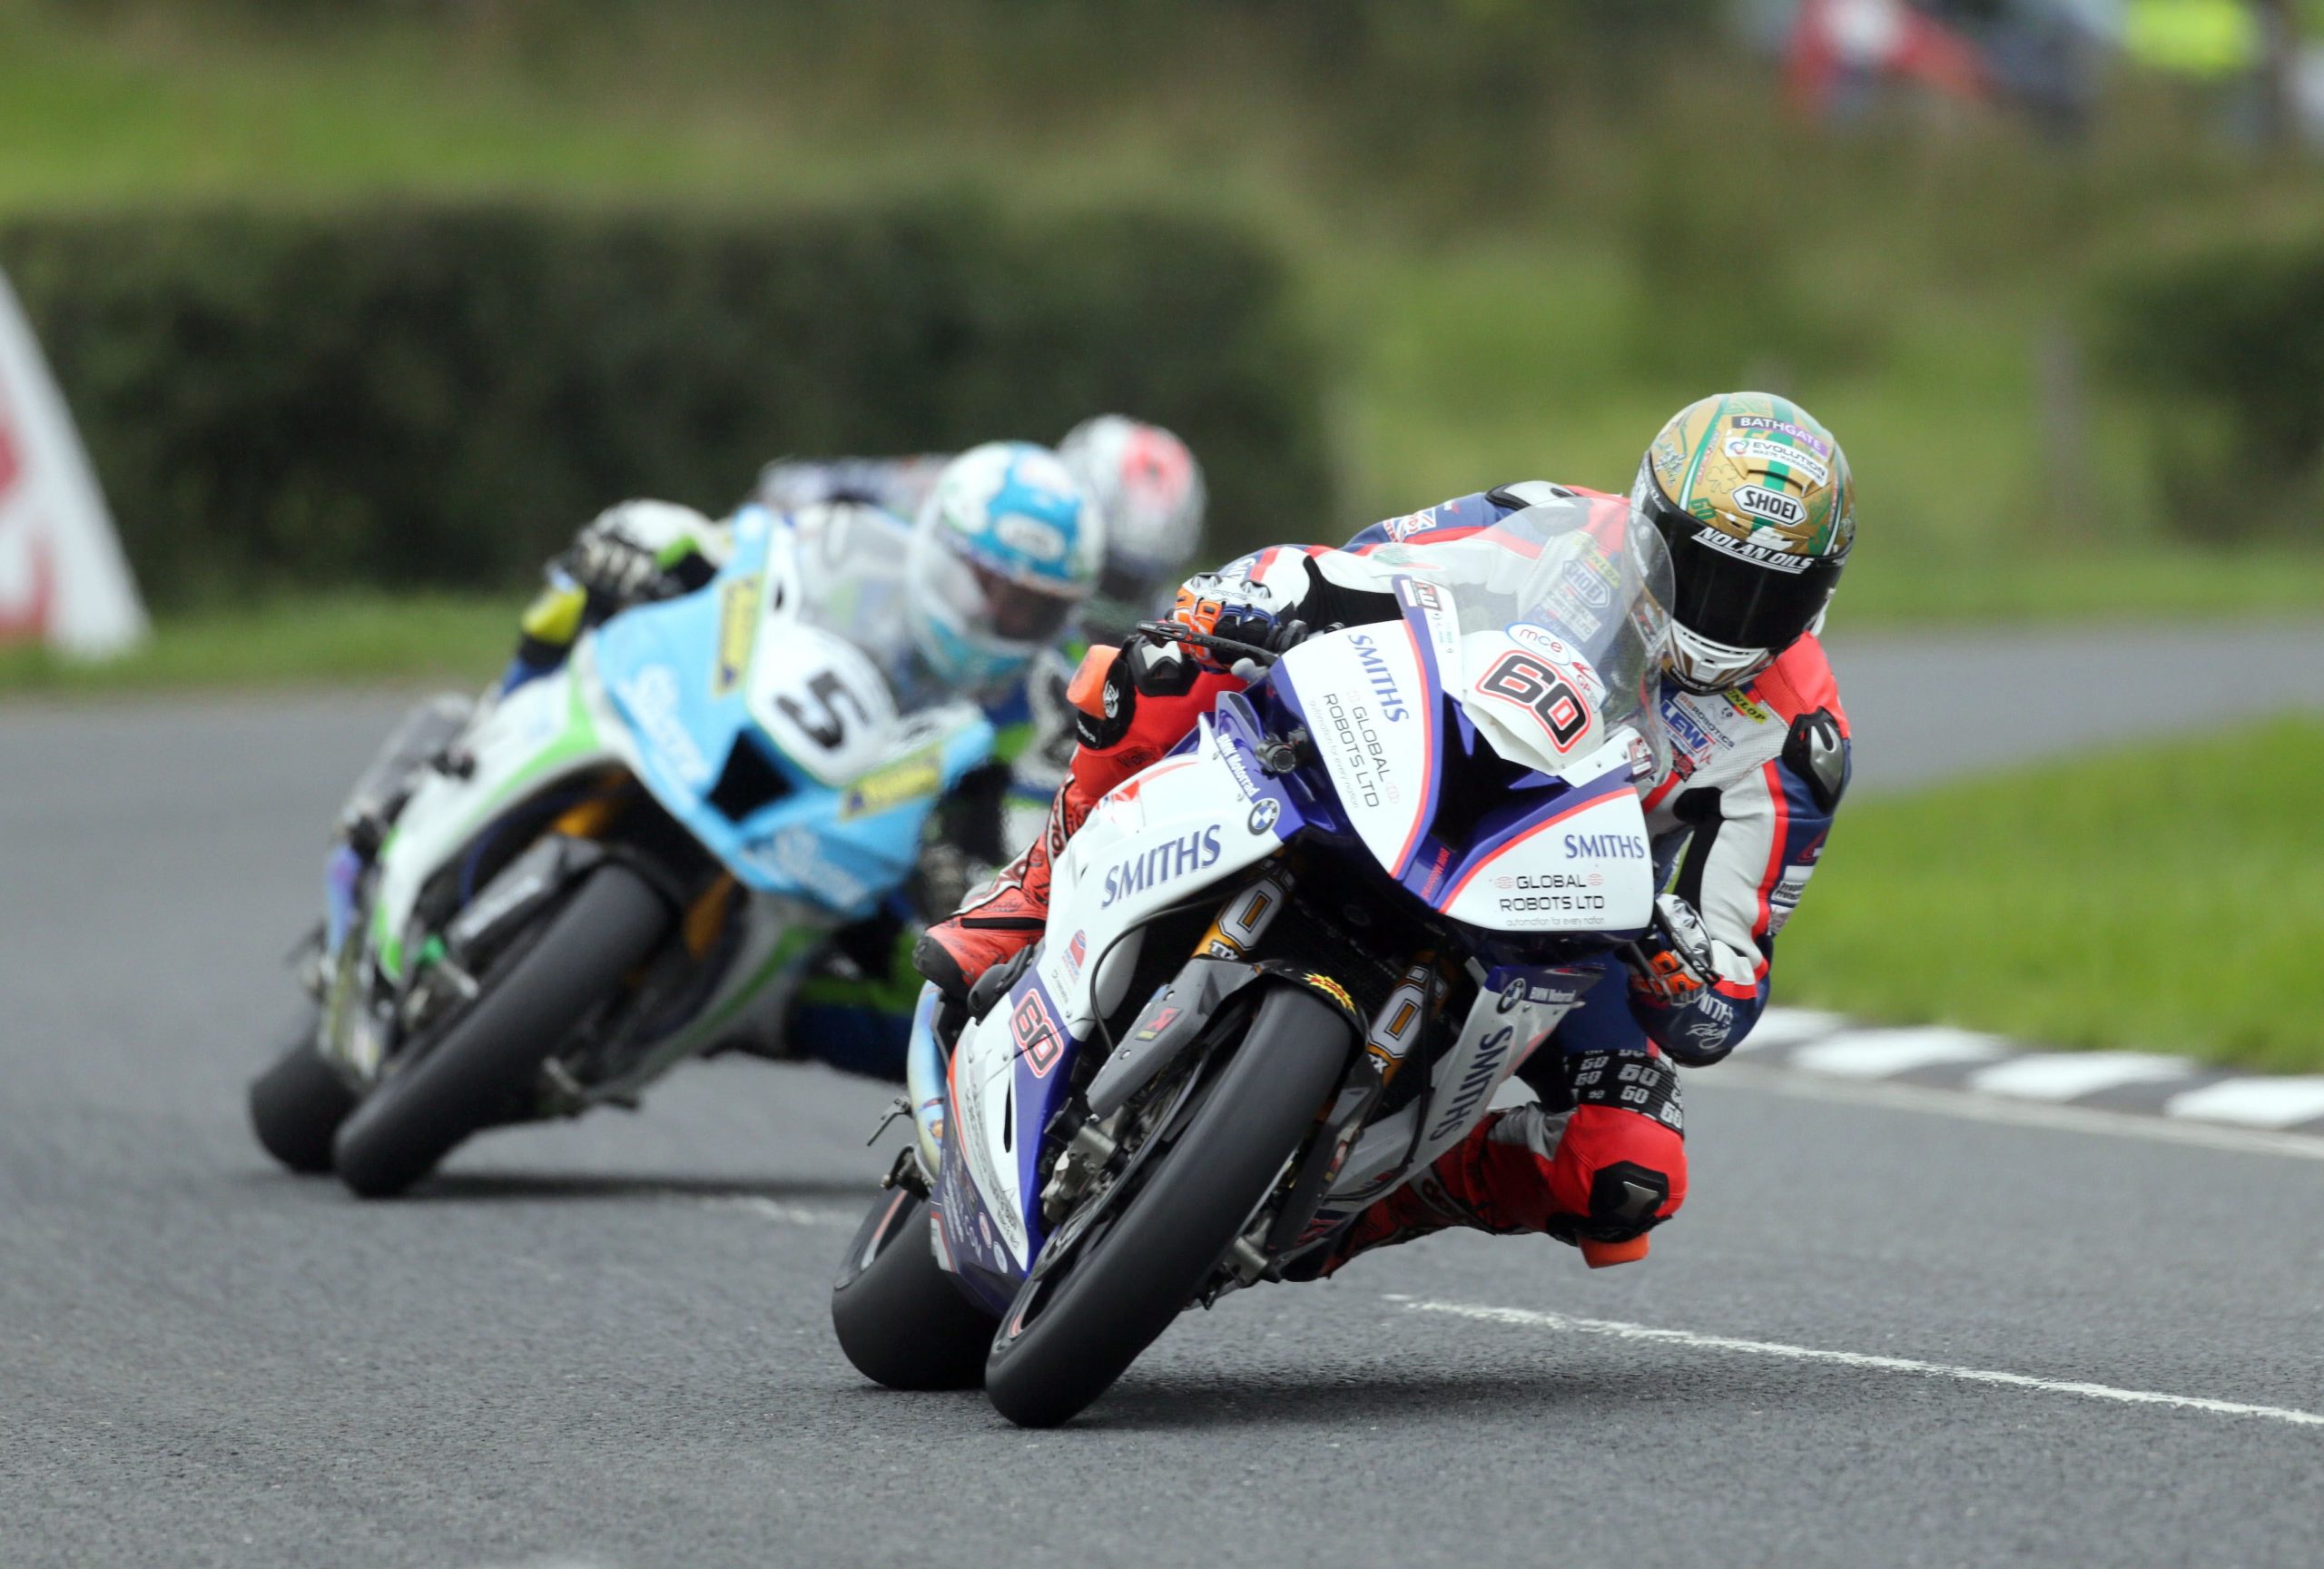 Peter Hickman (Smiths BMW) and Dean Harrison (Silicone Kawasaki) through Quarry Bends during the Superbike race at the Ulster Grand Prix today. The race was stopped twice following a crash and rain disruption.